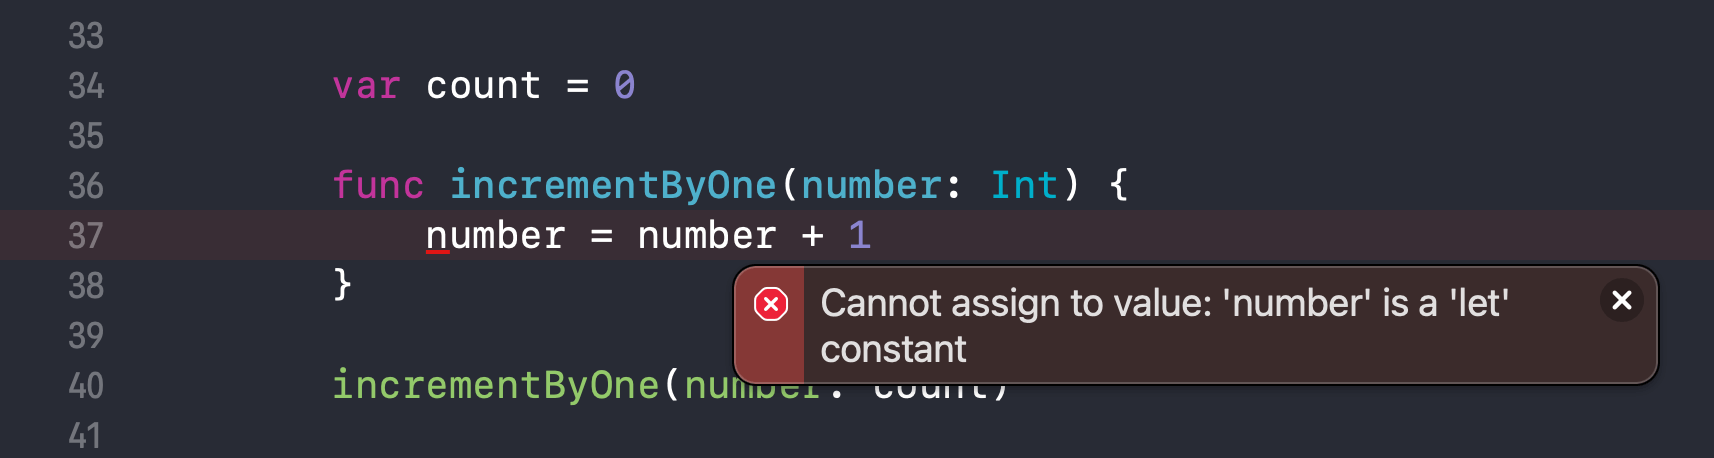 Cannot assign to value: 'number' is a 'let' constant.